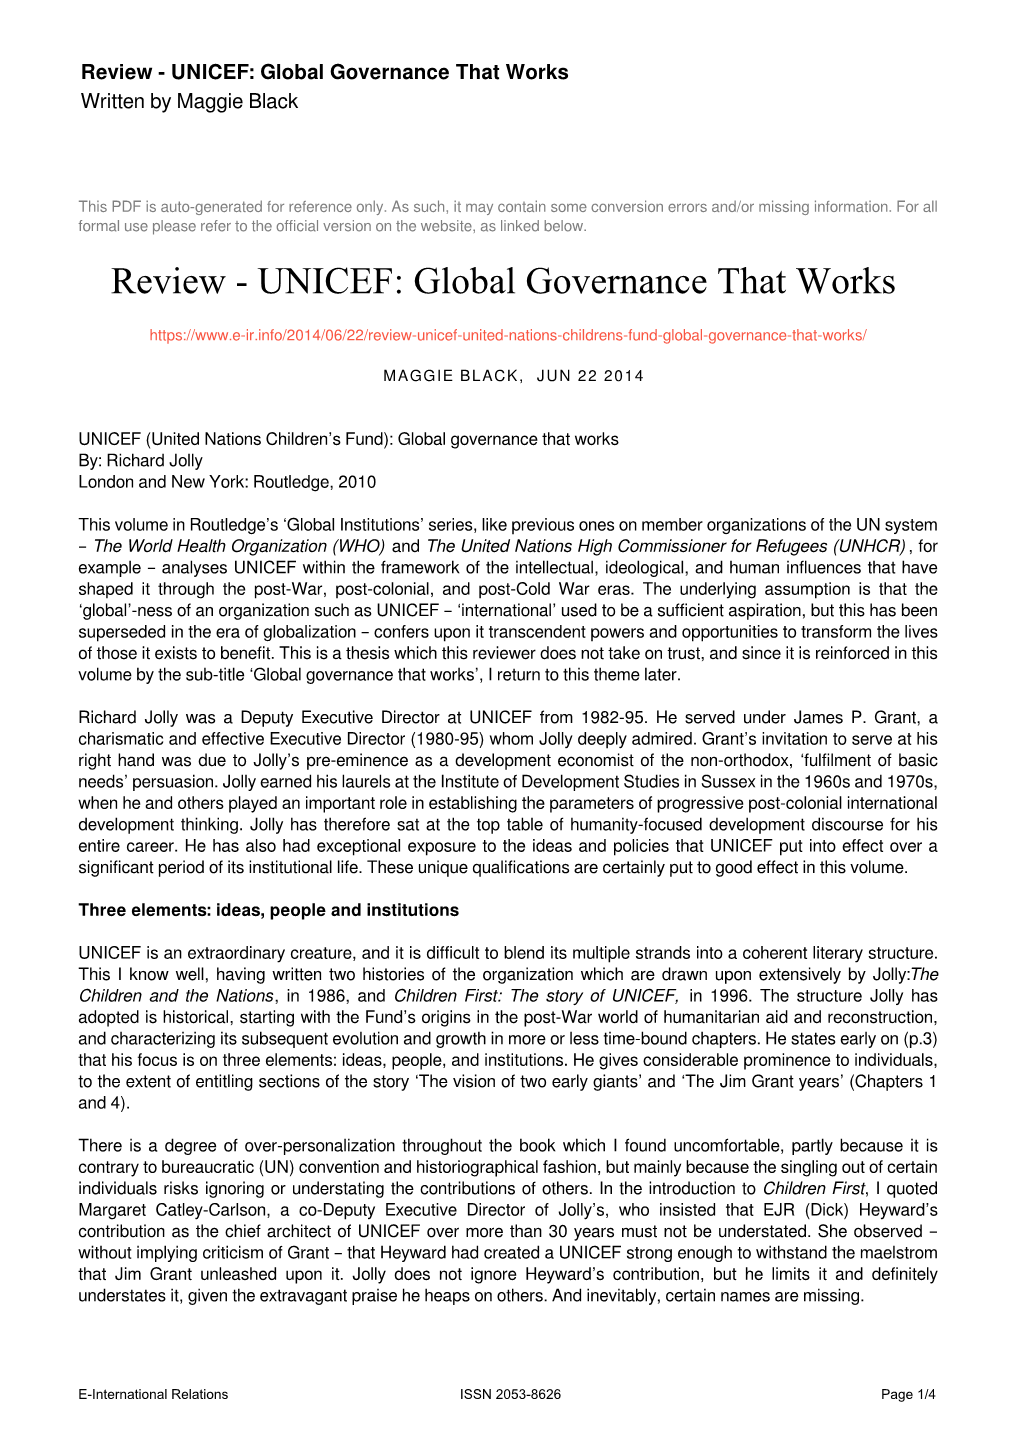 UNICEF: Global Governance That Works Written by Maggie Black